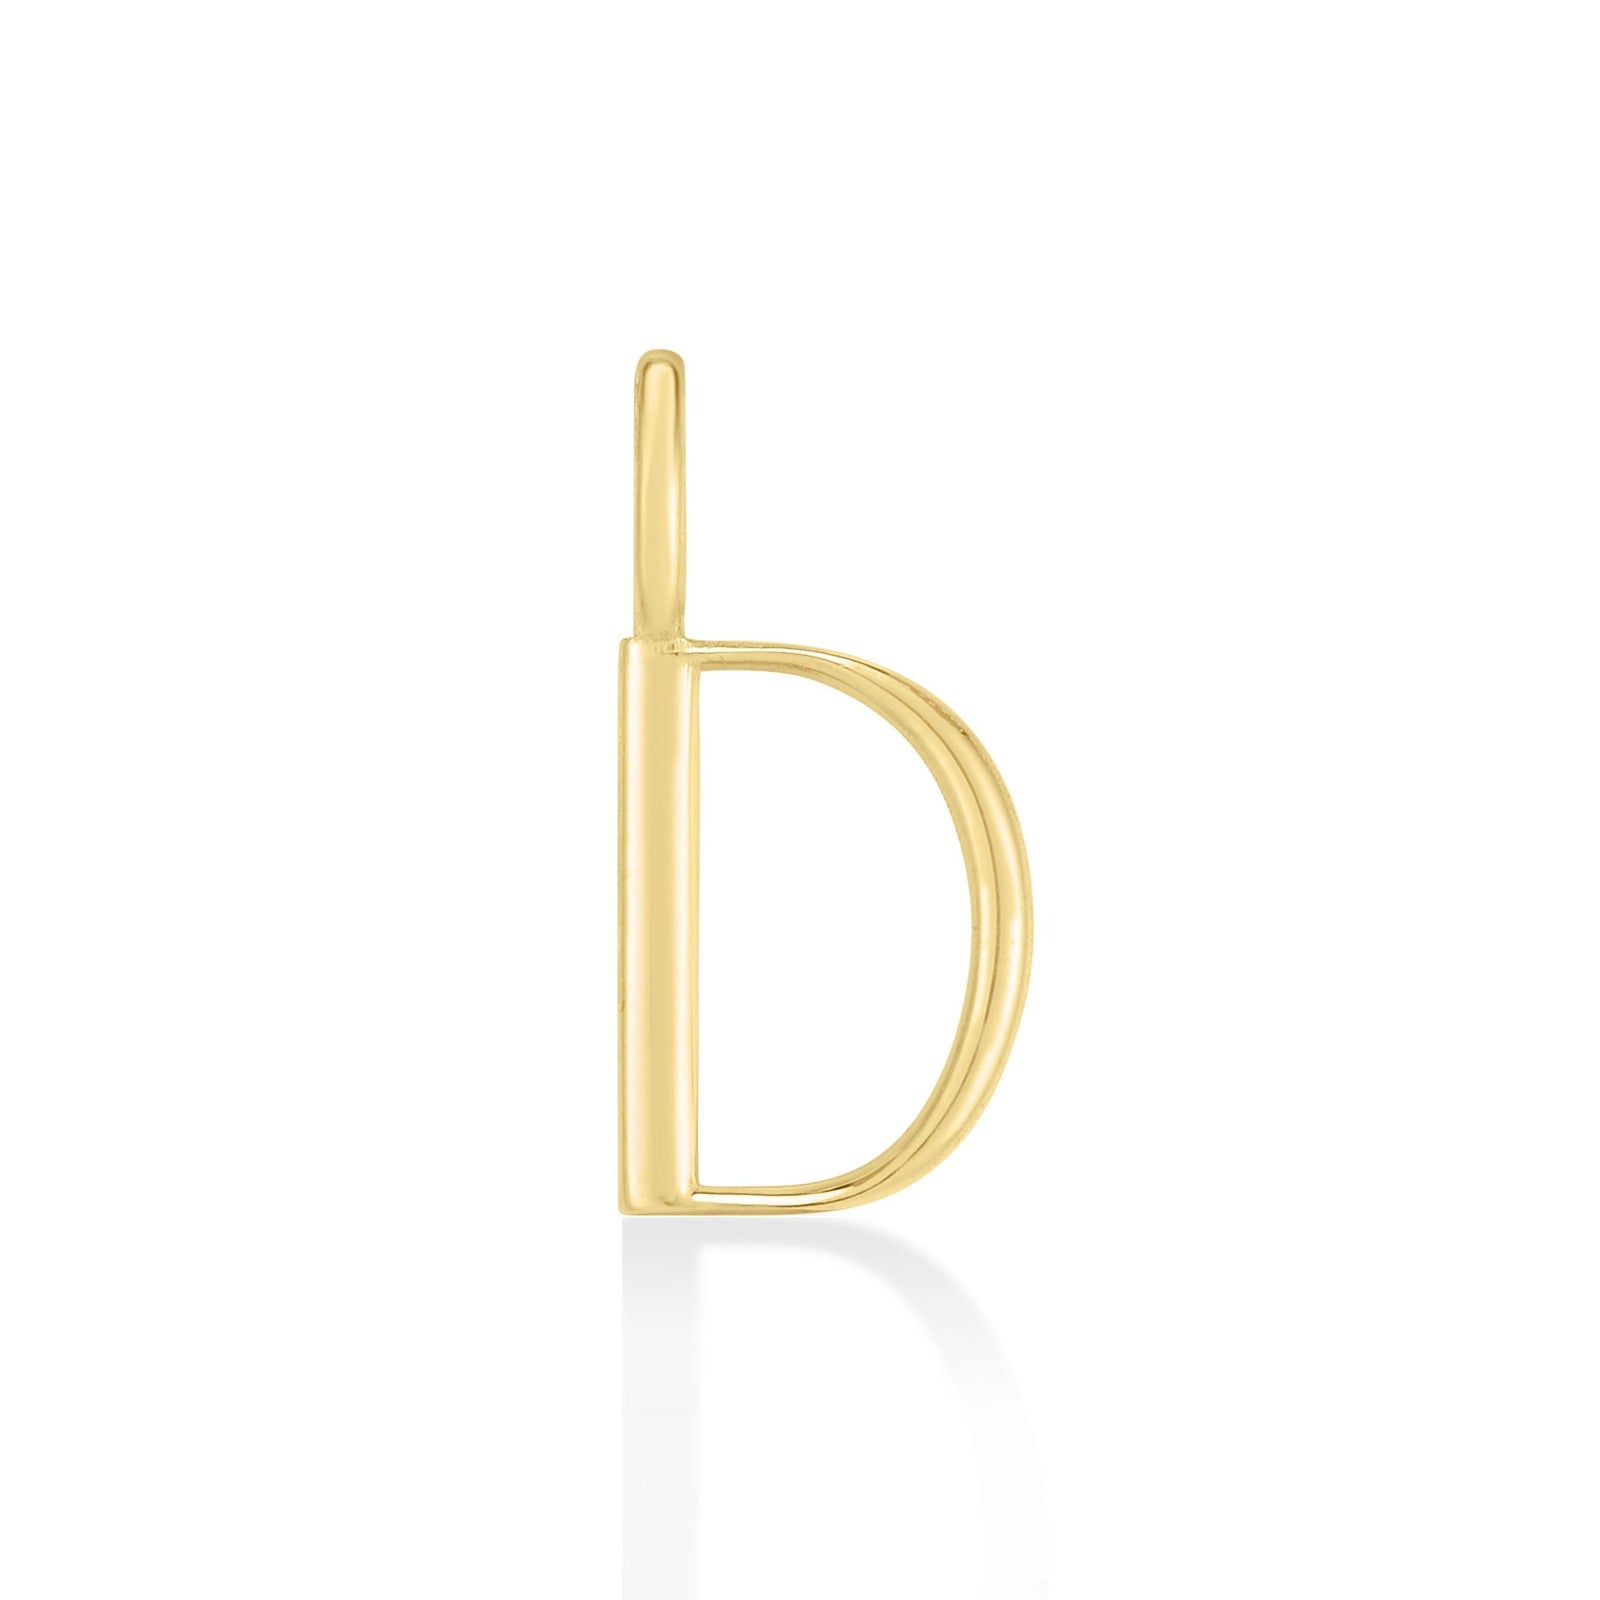 14K yellow gold D letter charm. 